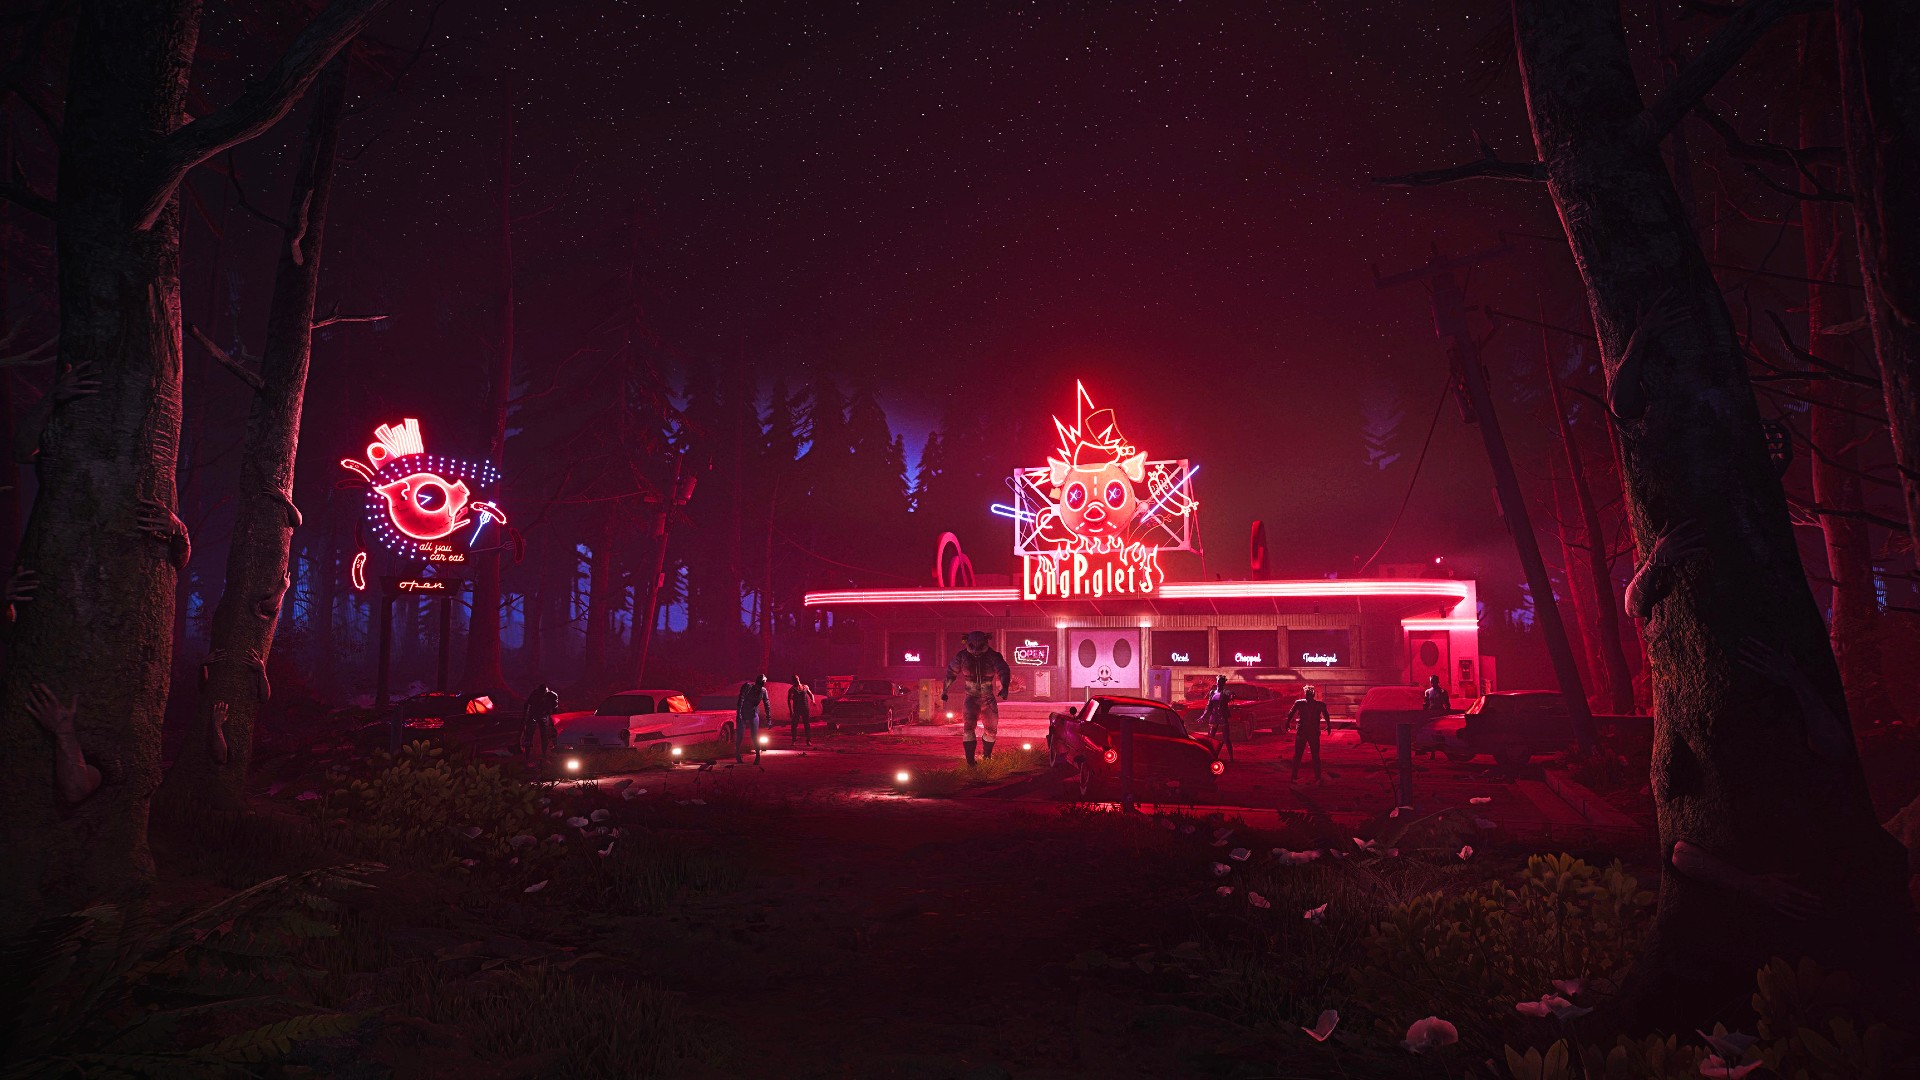 Dead Island 2's eerie Haus DLC looks like a whole new game